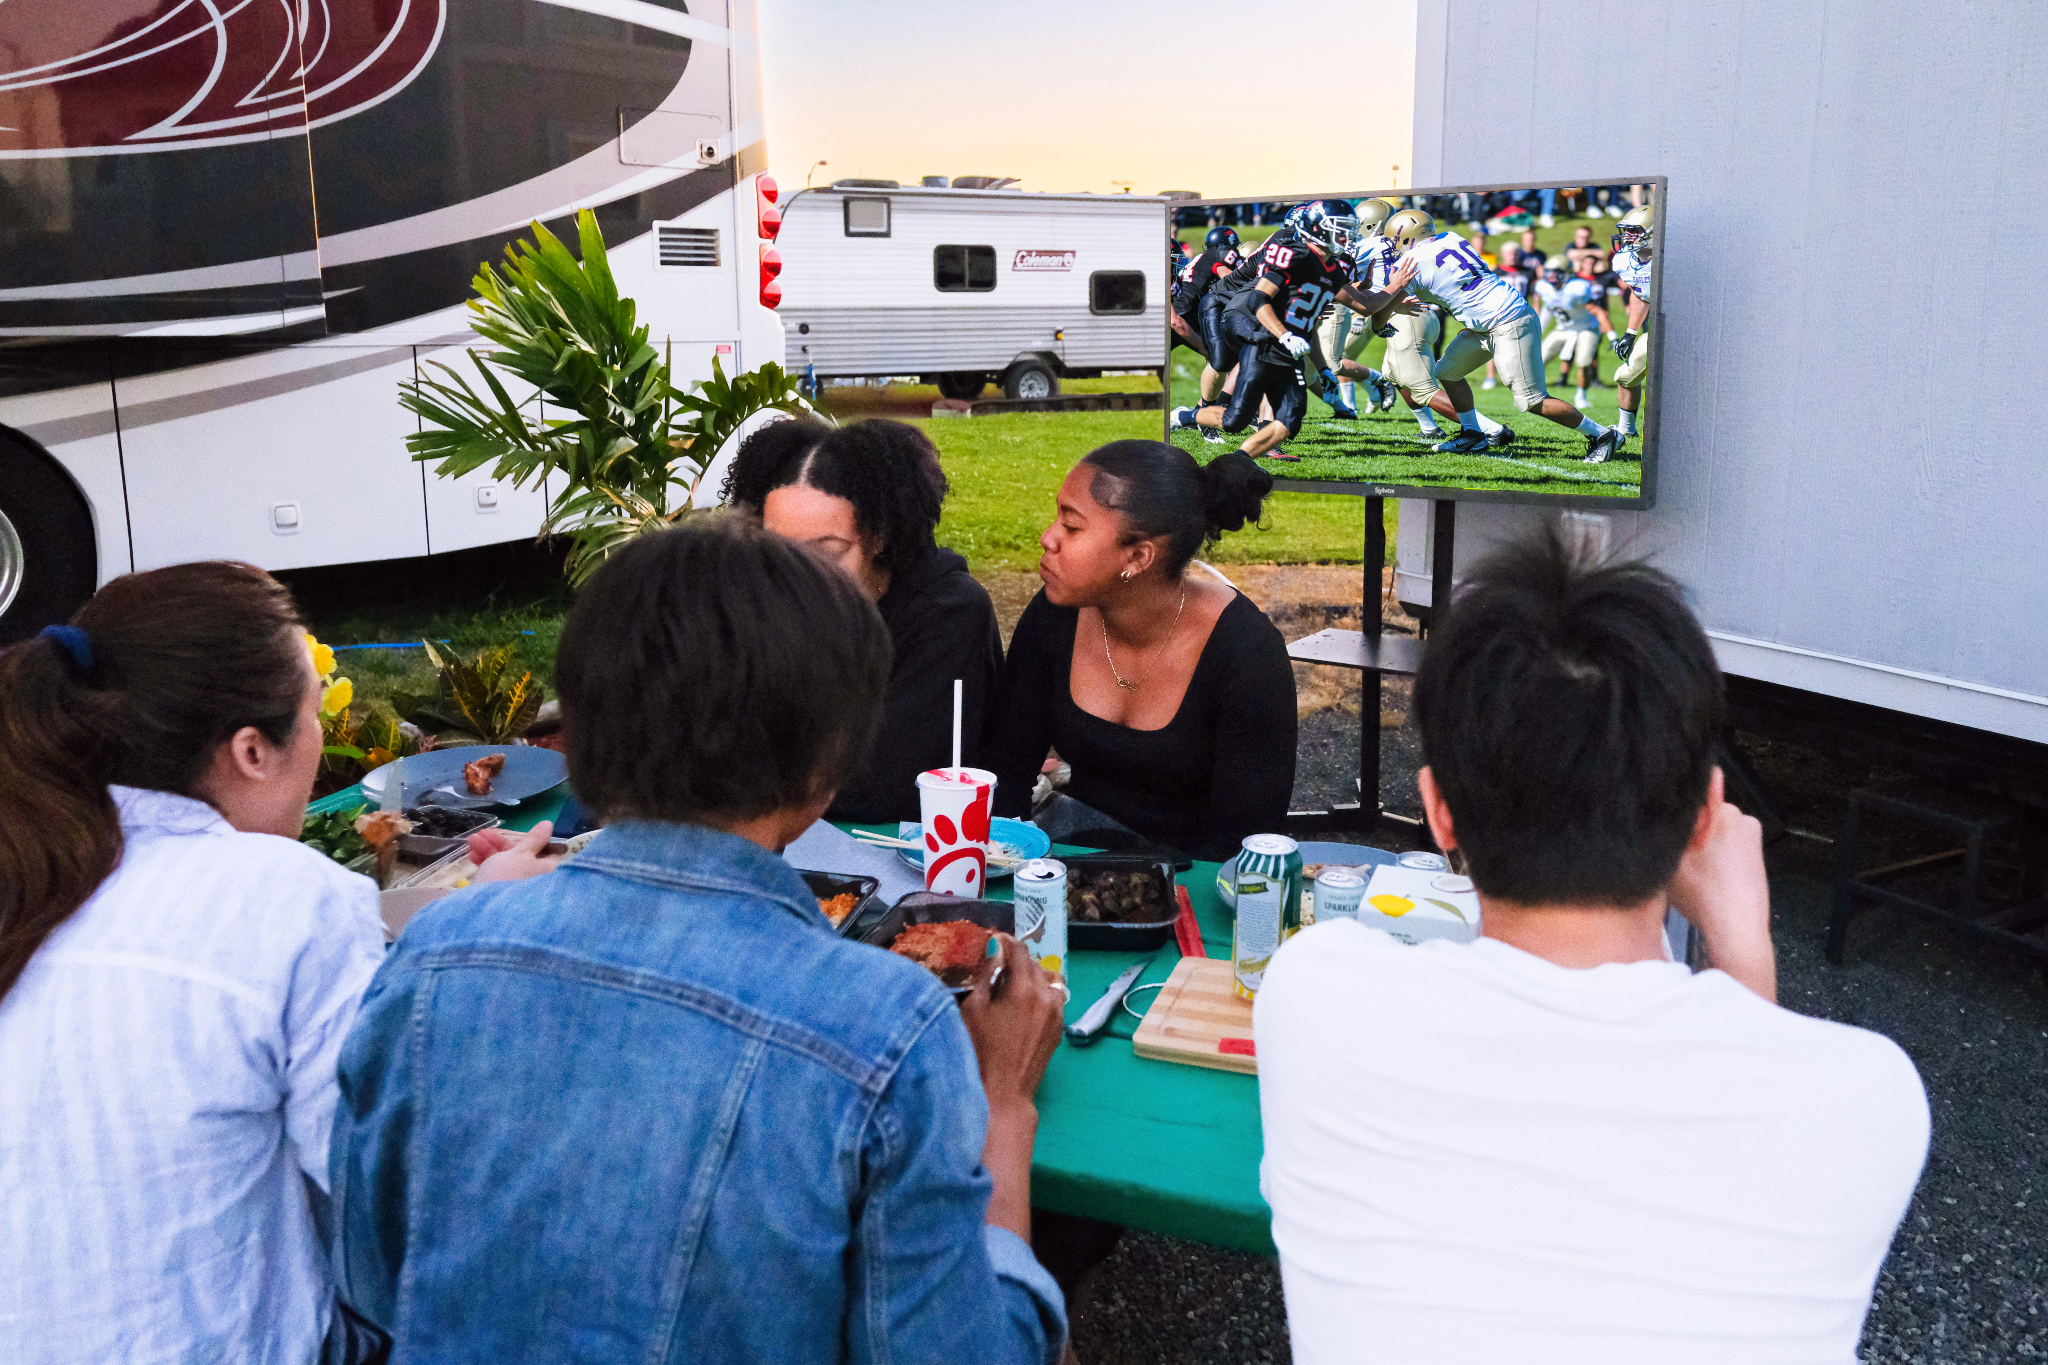 Sylvox Captivates Audience at Summer Camping Showcase with Cutting-Edge Outdoor Waterproof TV